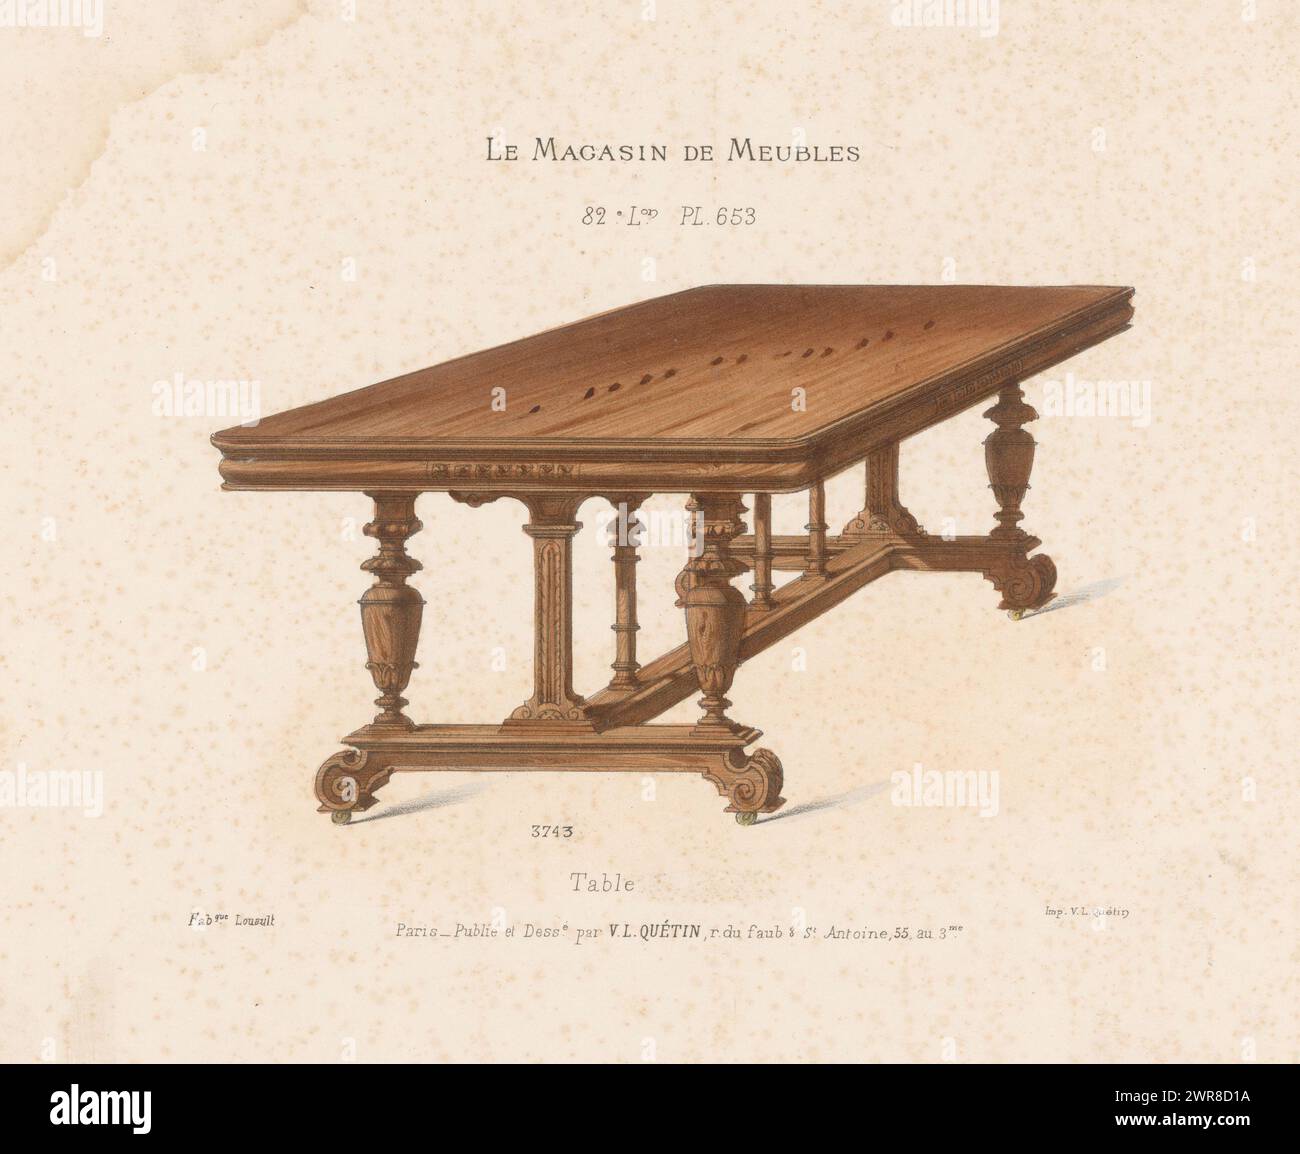 Table, Table (title on object), Le Magasin de Meubles (series title on object), A table. Print from 82nd Livraison., print maker: anonymous, after design by: Victor Léon Michel Quétin, printer: Victor Léon Michel Quétin, Paris, 1878 - in or after 1904, paper, height 275 mm × width 361 mm, print Stock Photo